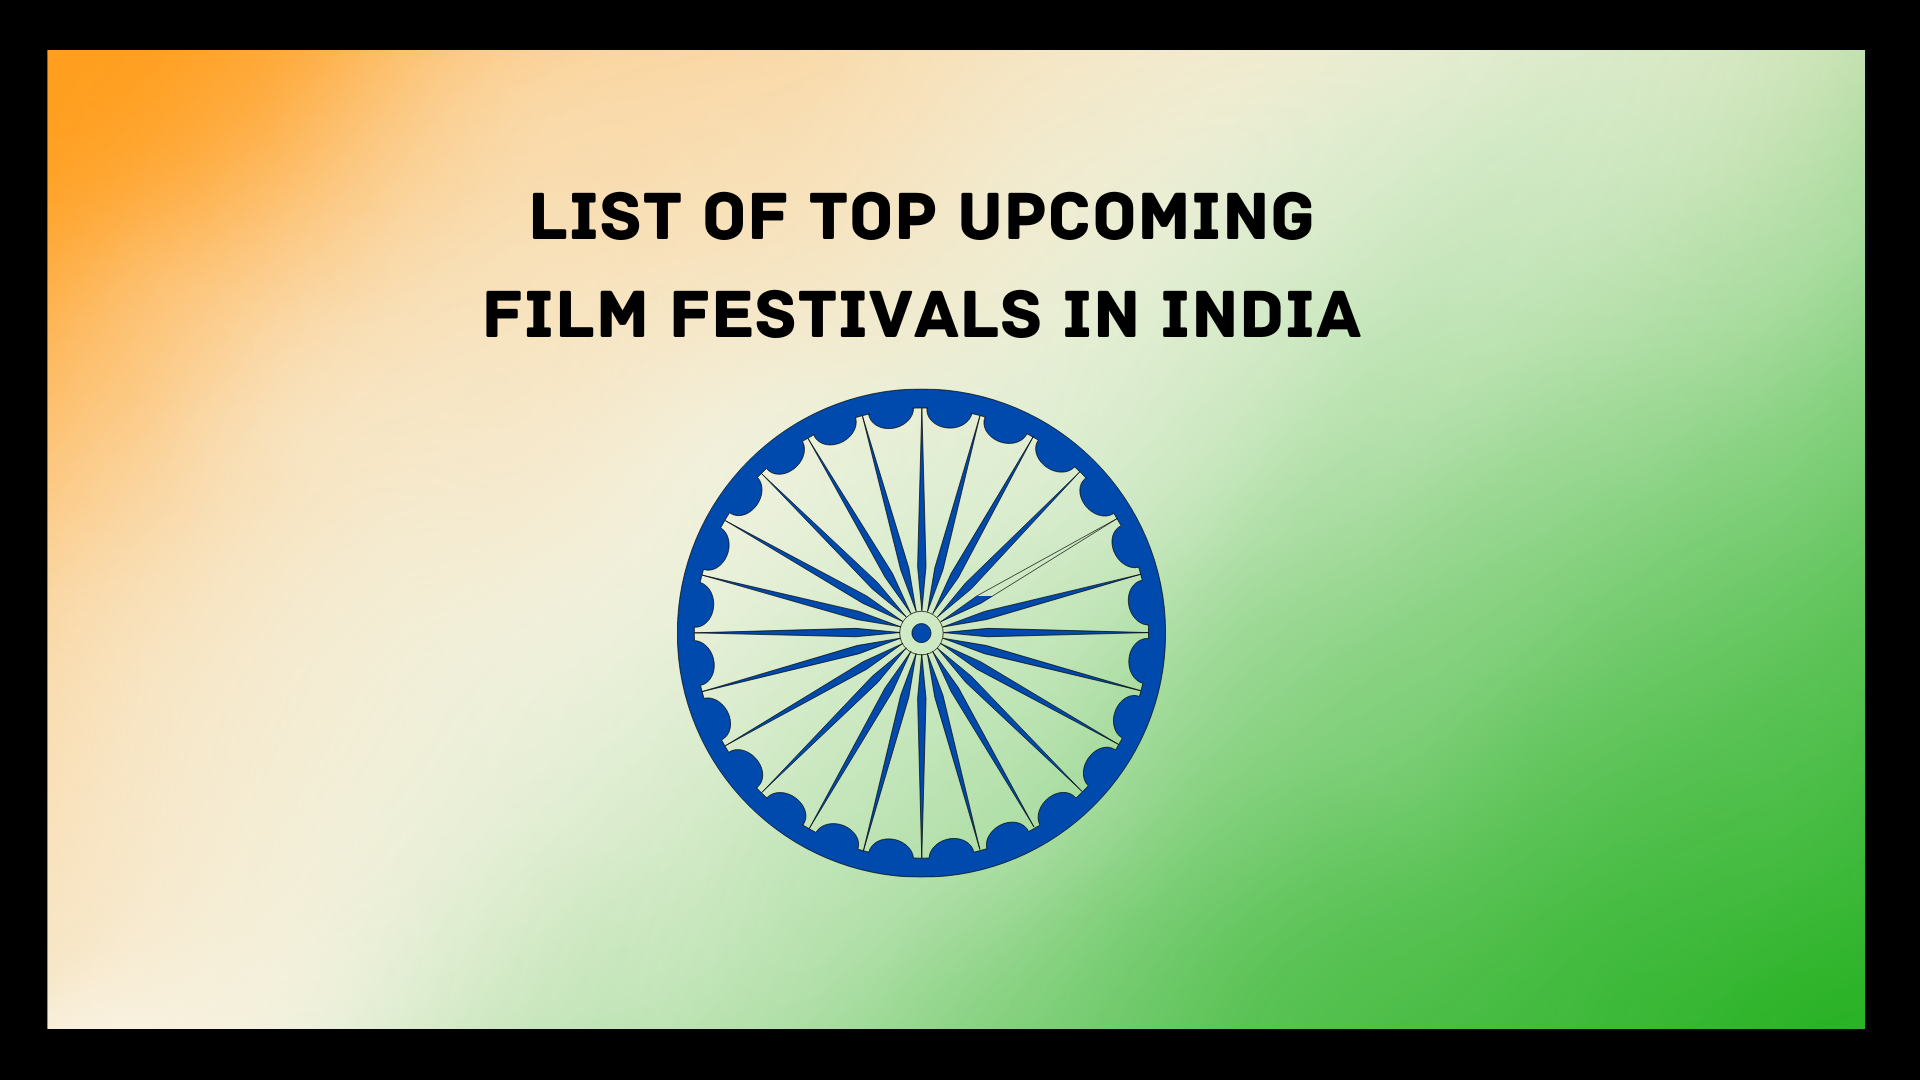 List of Top Upcoming Film Festivals In India